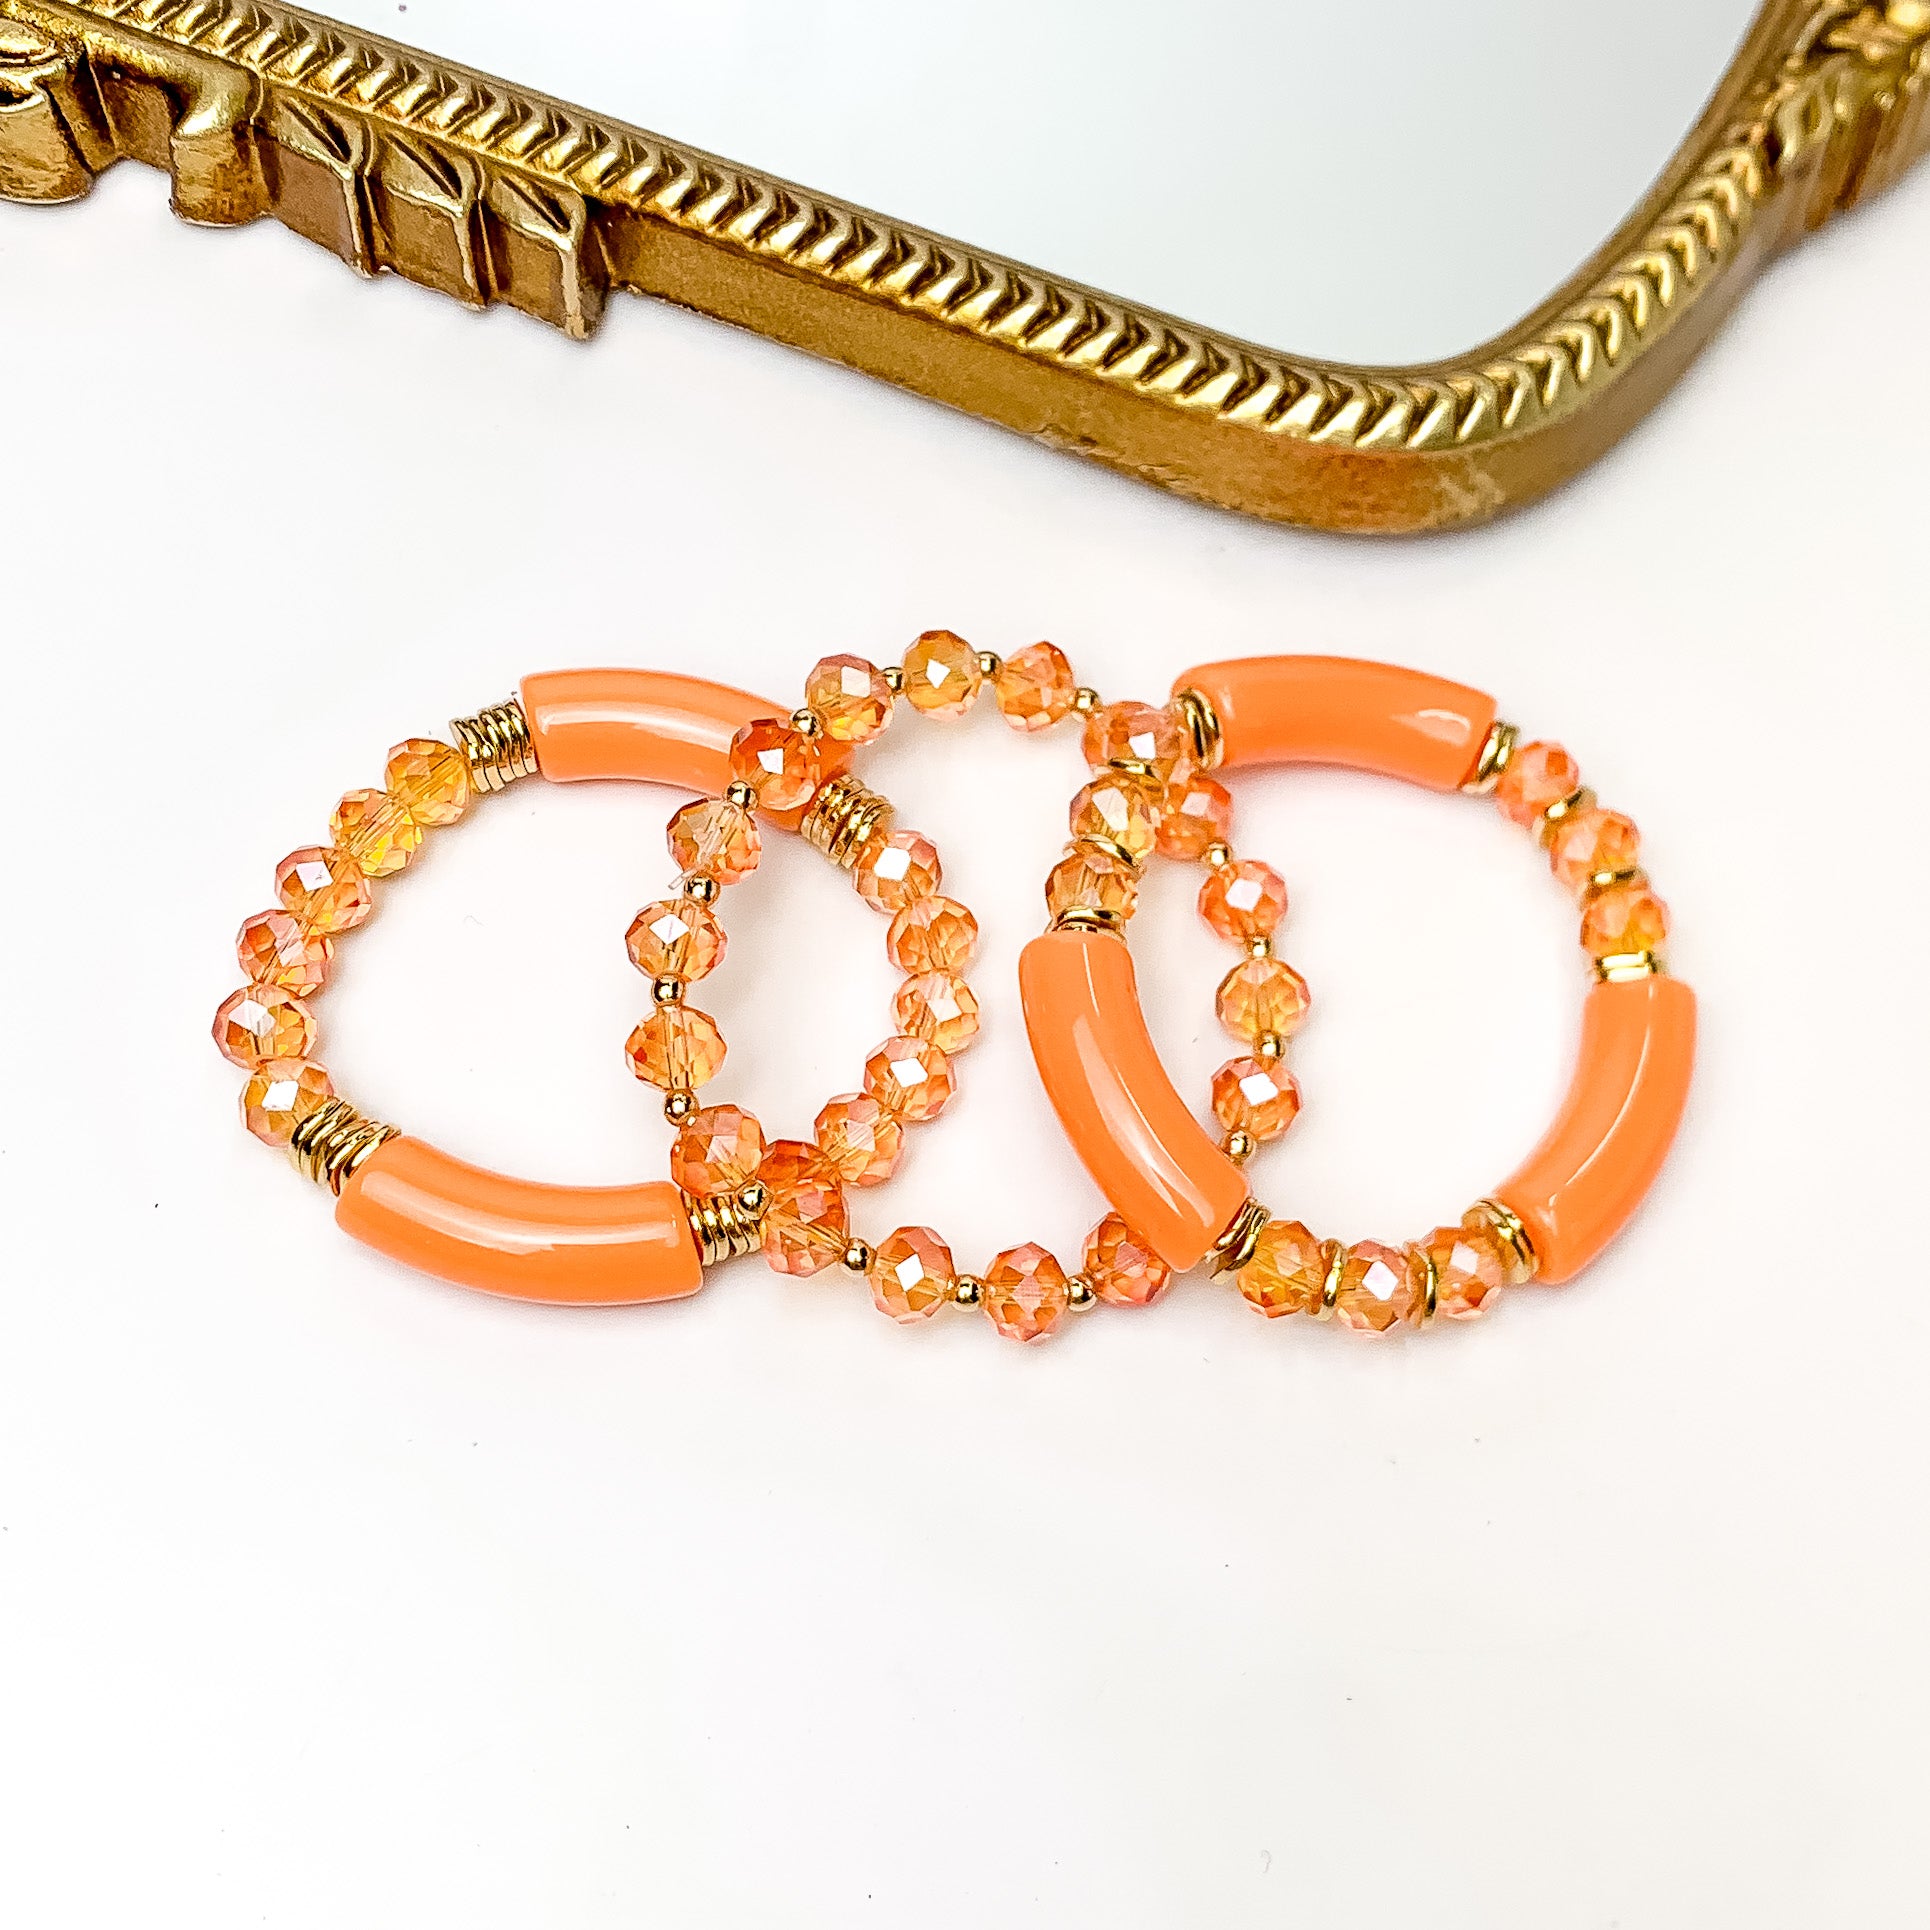 Set of Three | Sunny Bliss Crystal Beaded Bracelet Set in Orange. Pictured on a white background with a gold trimmed mirror above the bracelets.